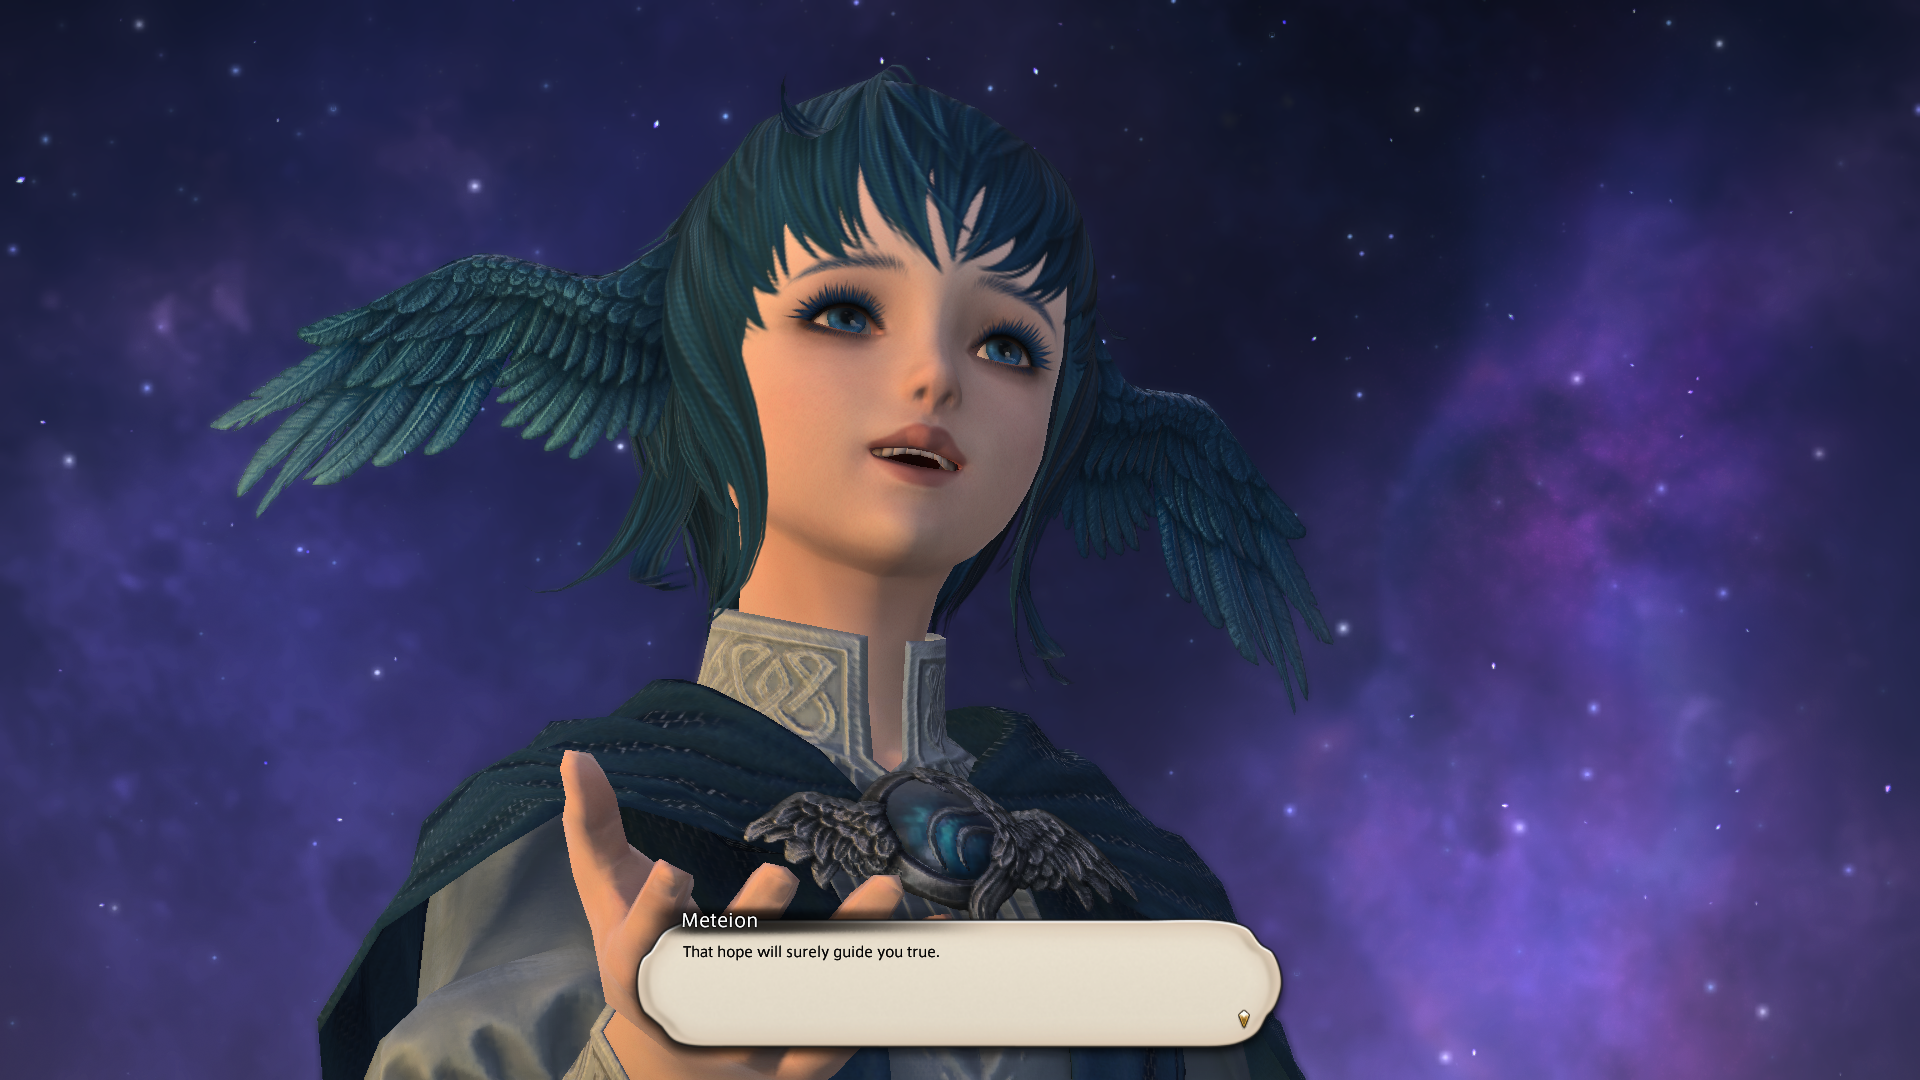 Who Is Meteion in FF14?